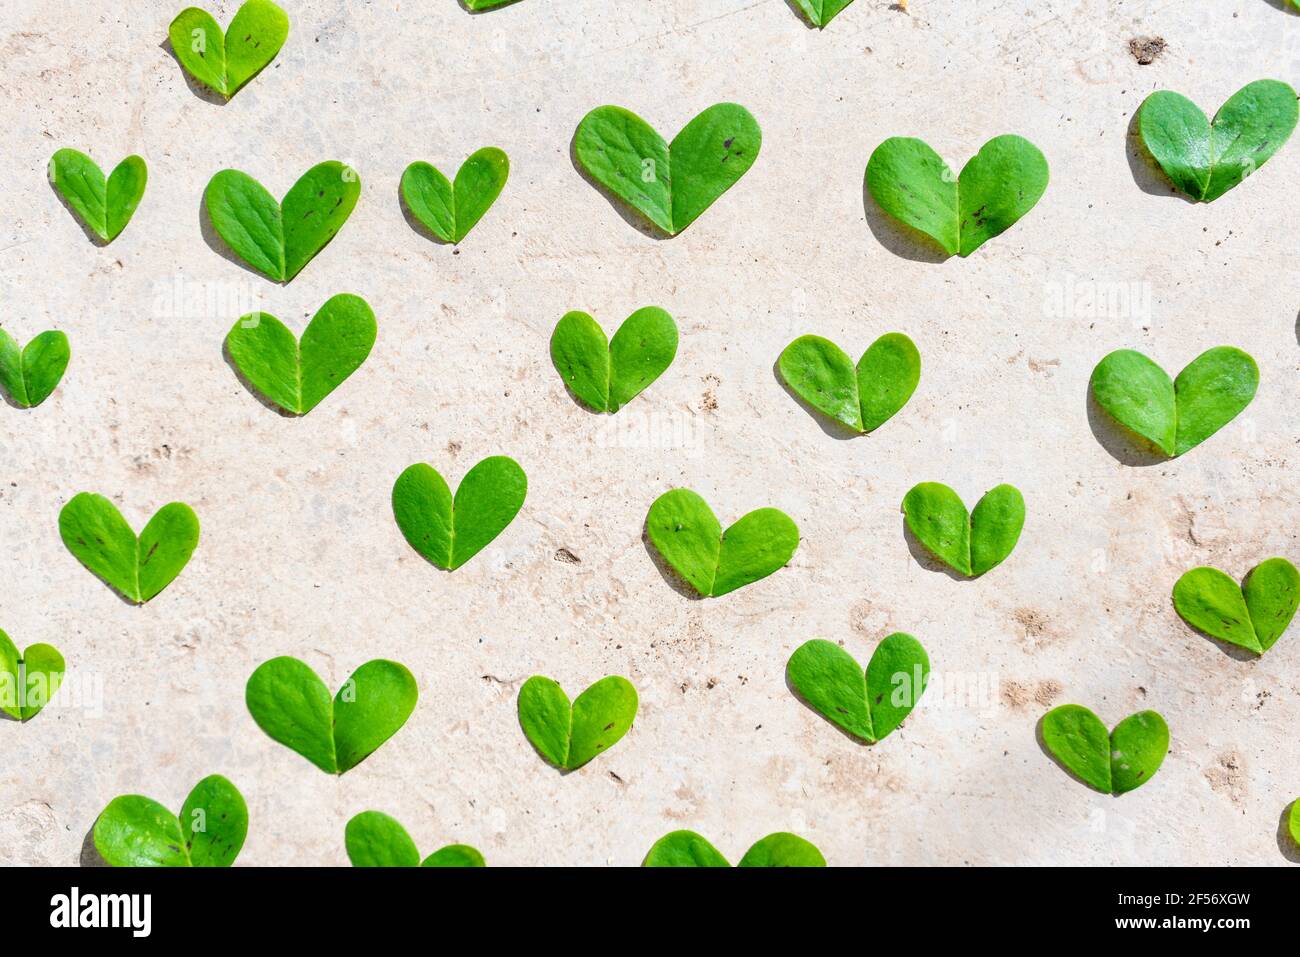 Green heart shaped leaves on cement Stock Photo